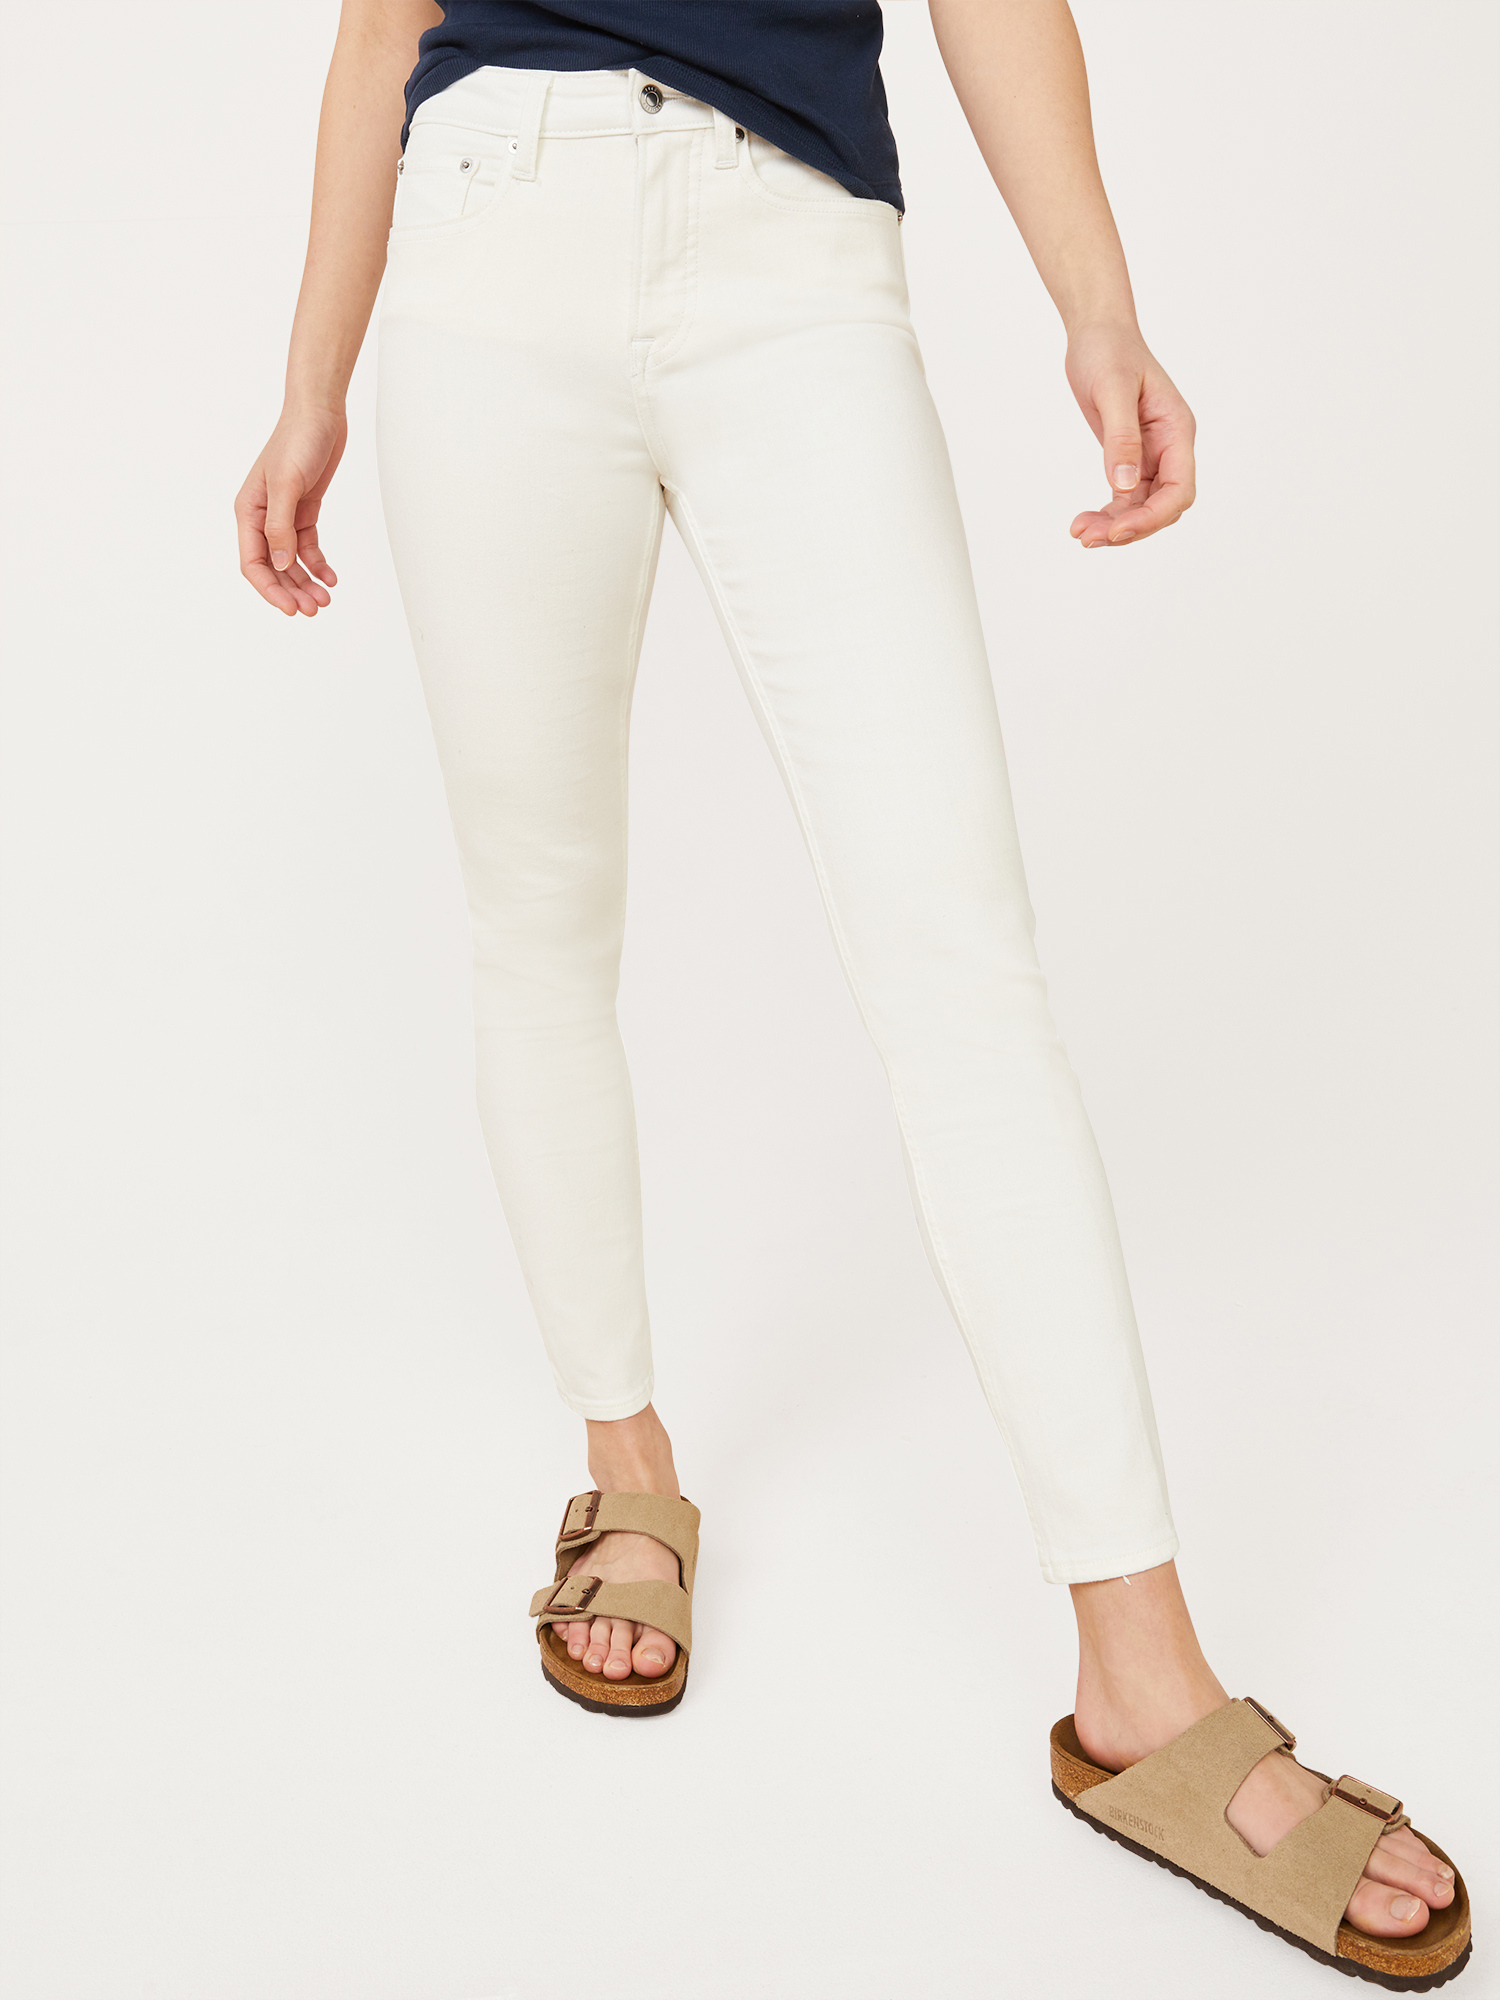 Free Assembly Women's High Rise Skinny Jeans - image 1 of 5